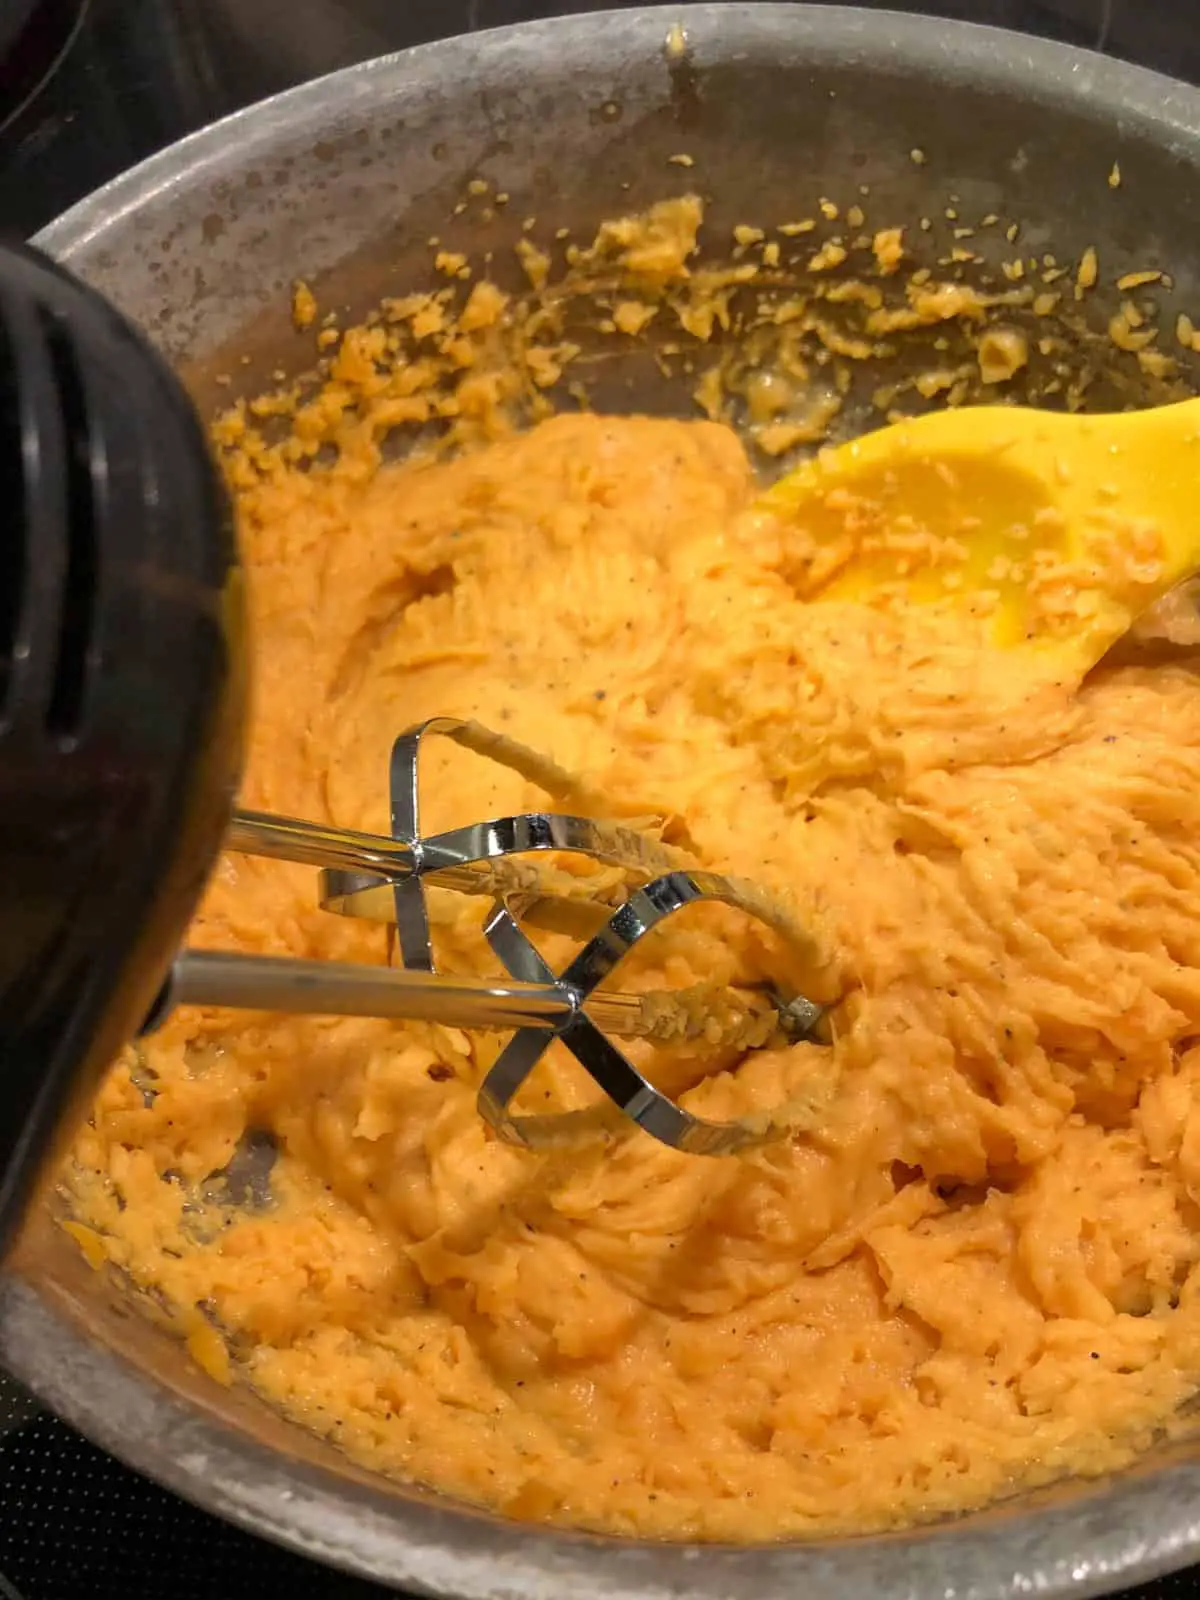 Mashed sweet potatoes in a saucepan with a yellow silicone spoon and the whisk attachments of a hand blender in the bed of mashed sweet potatoes.